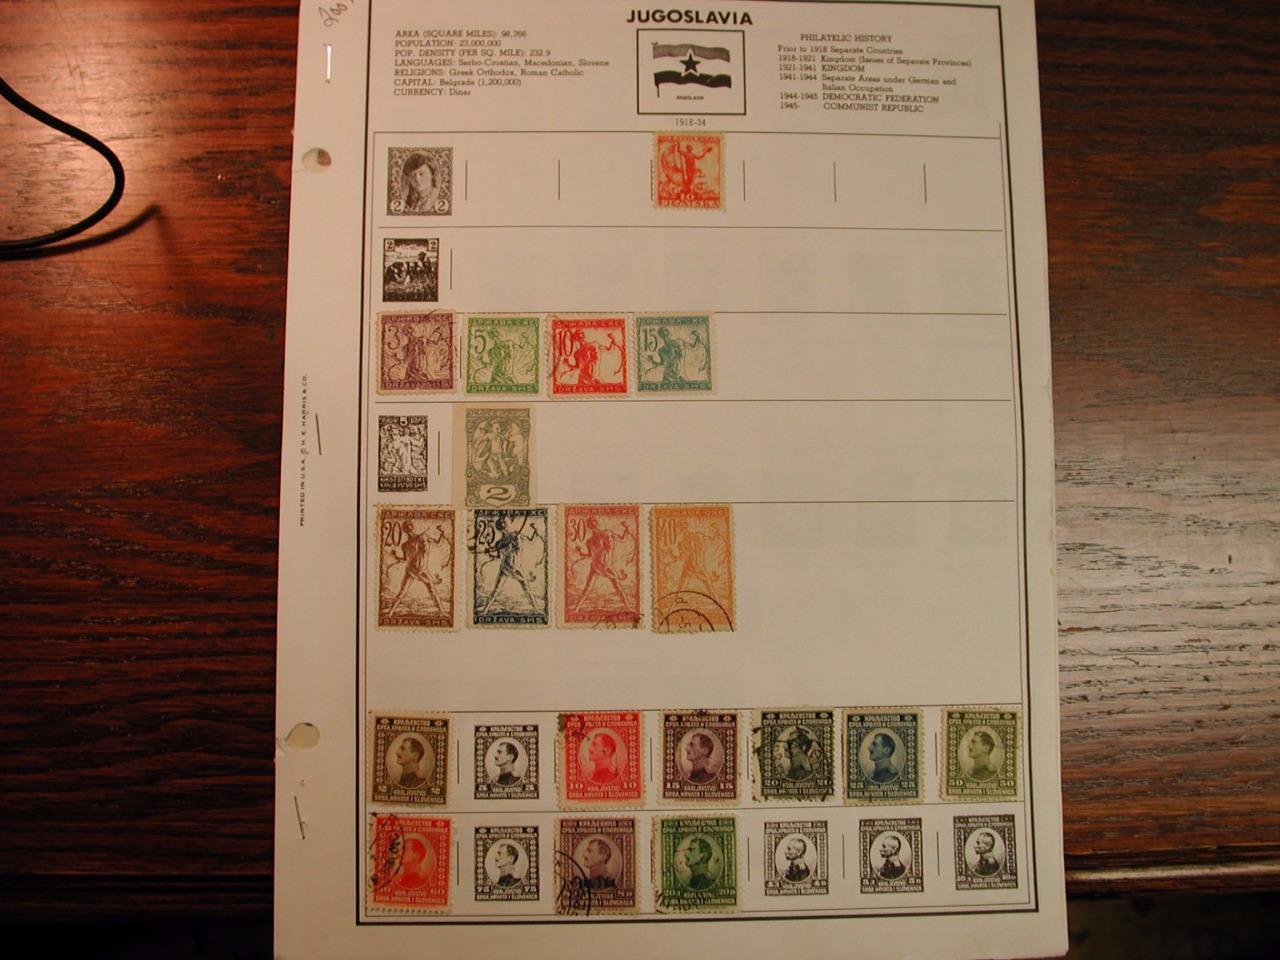 Yugoslavia Stamps Mounted Collection dated from 1930-1960 over 200 stamps